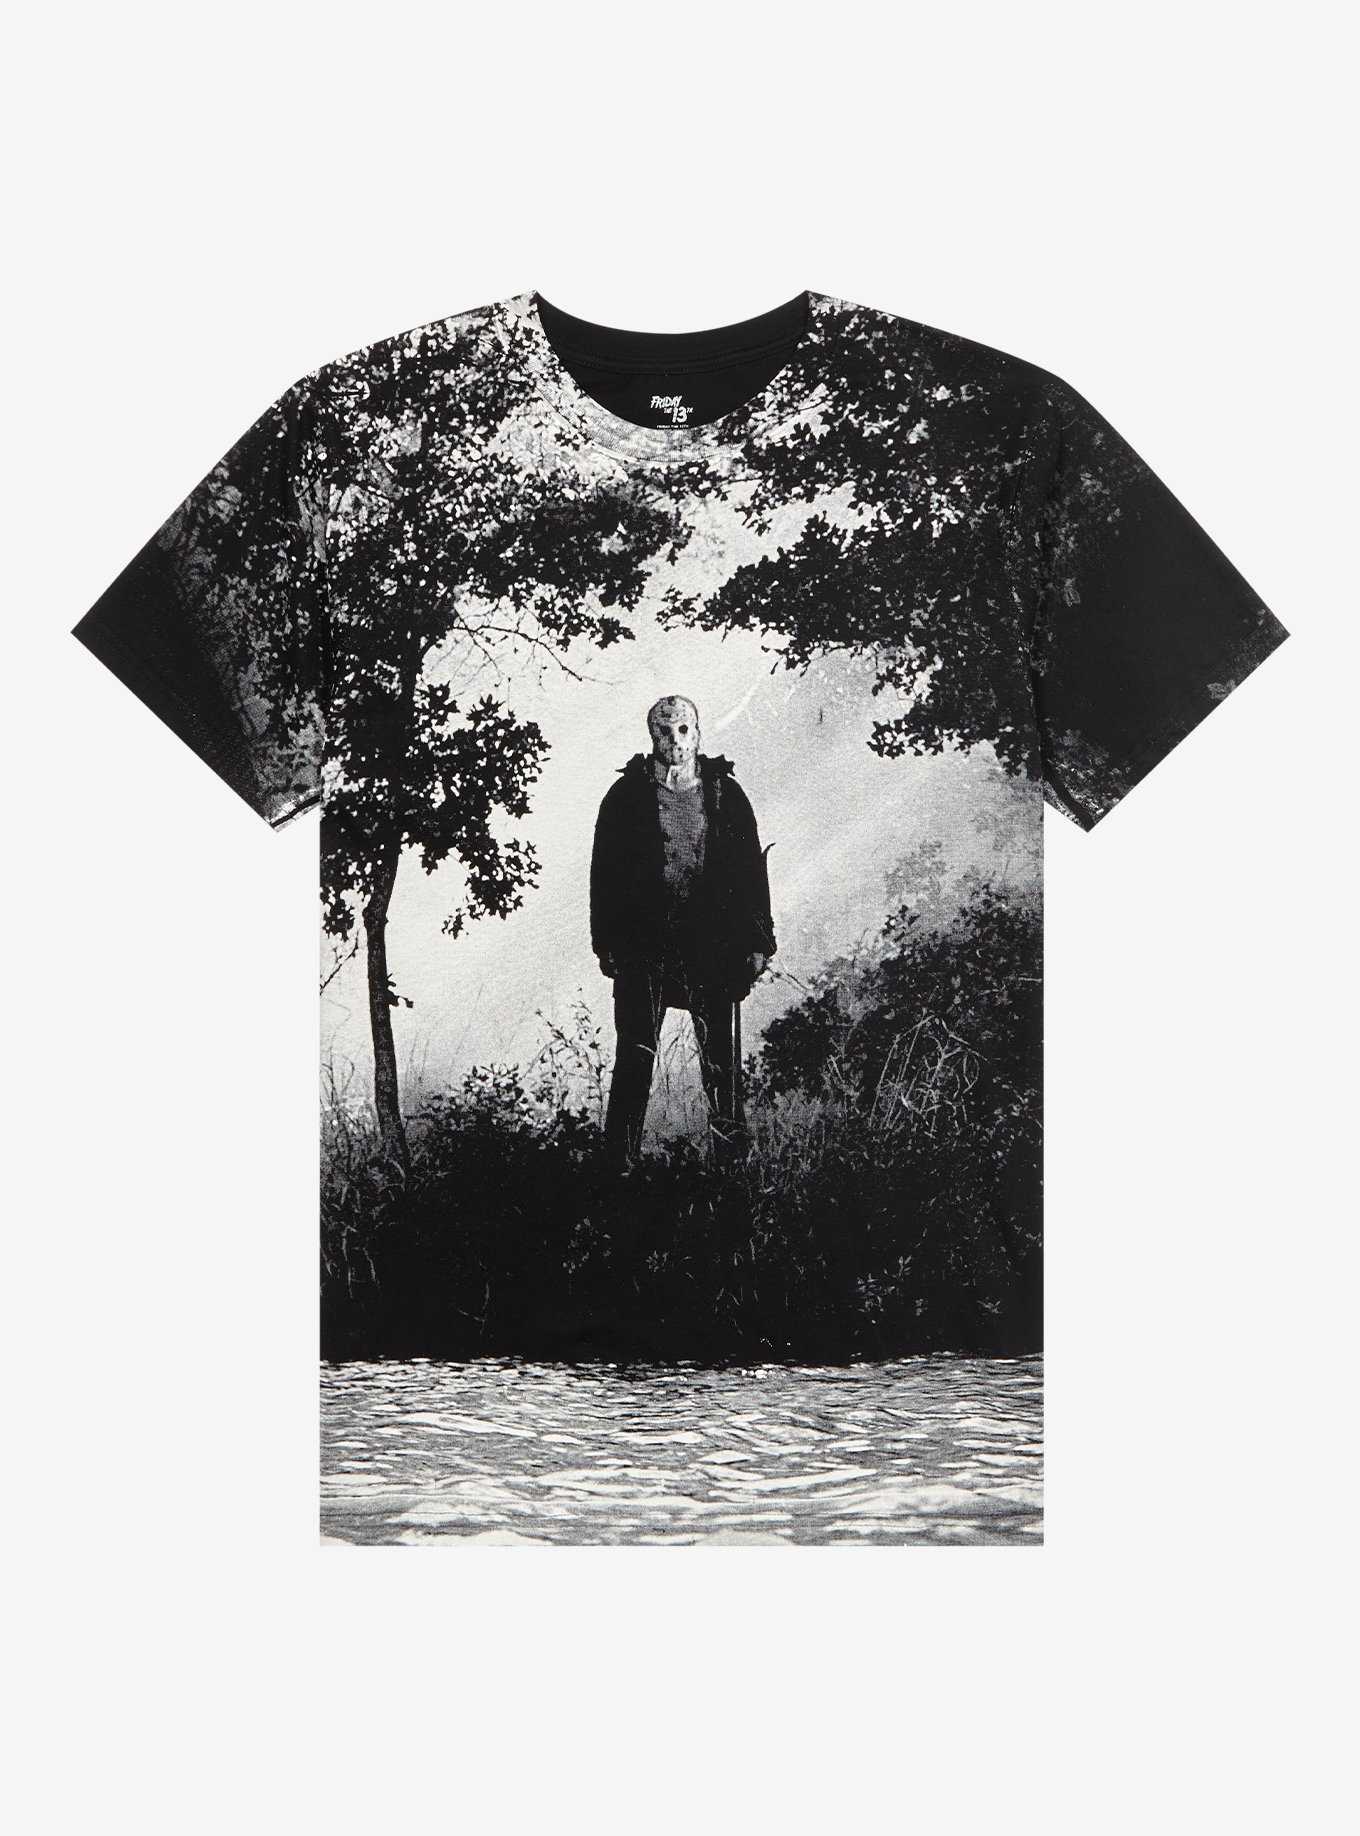 Friday The 13th Jason Forest T-Shirt, , hi-res